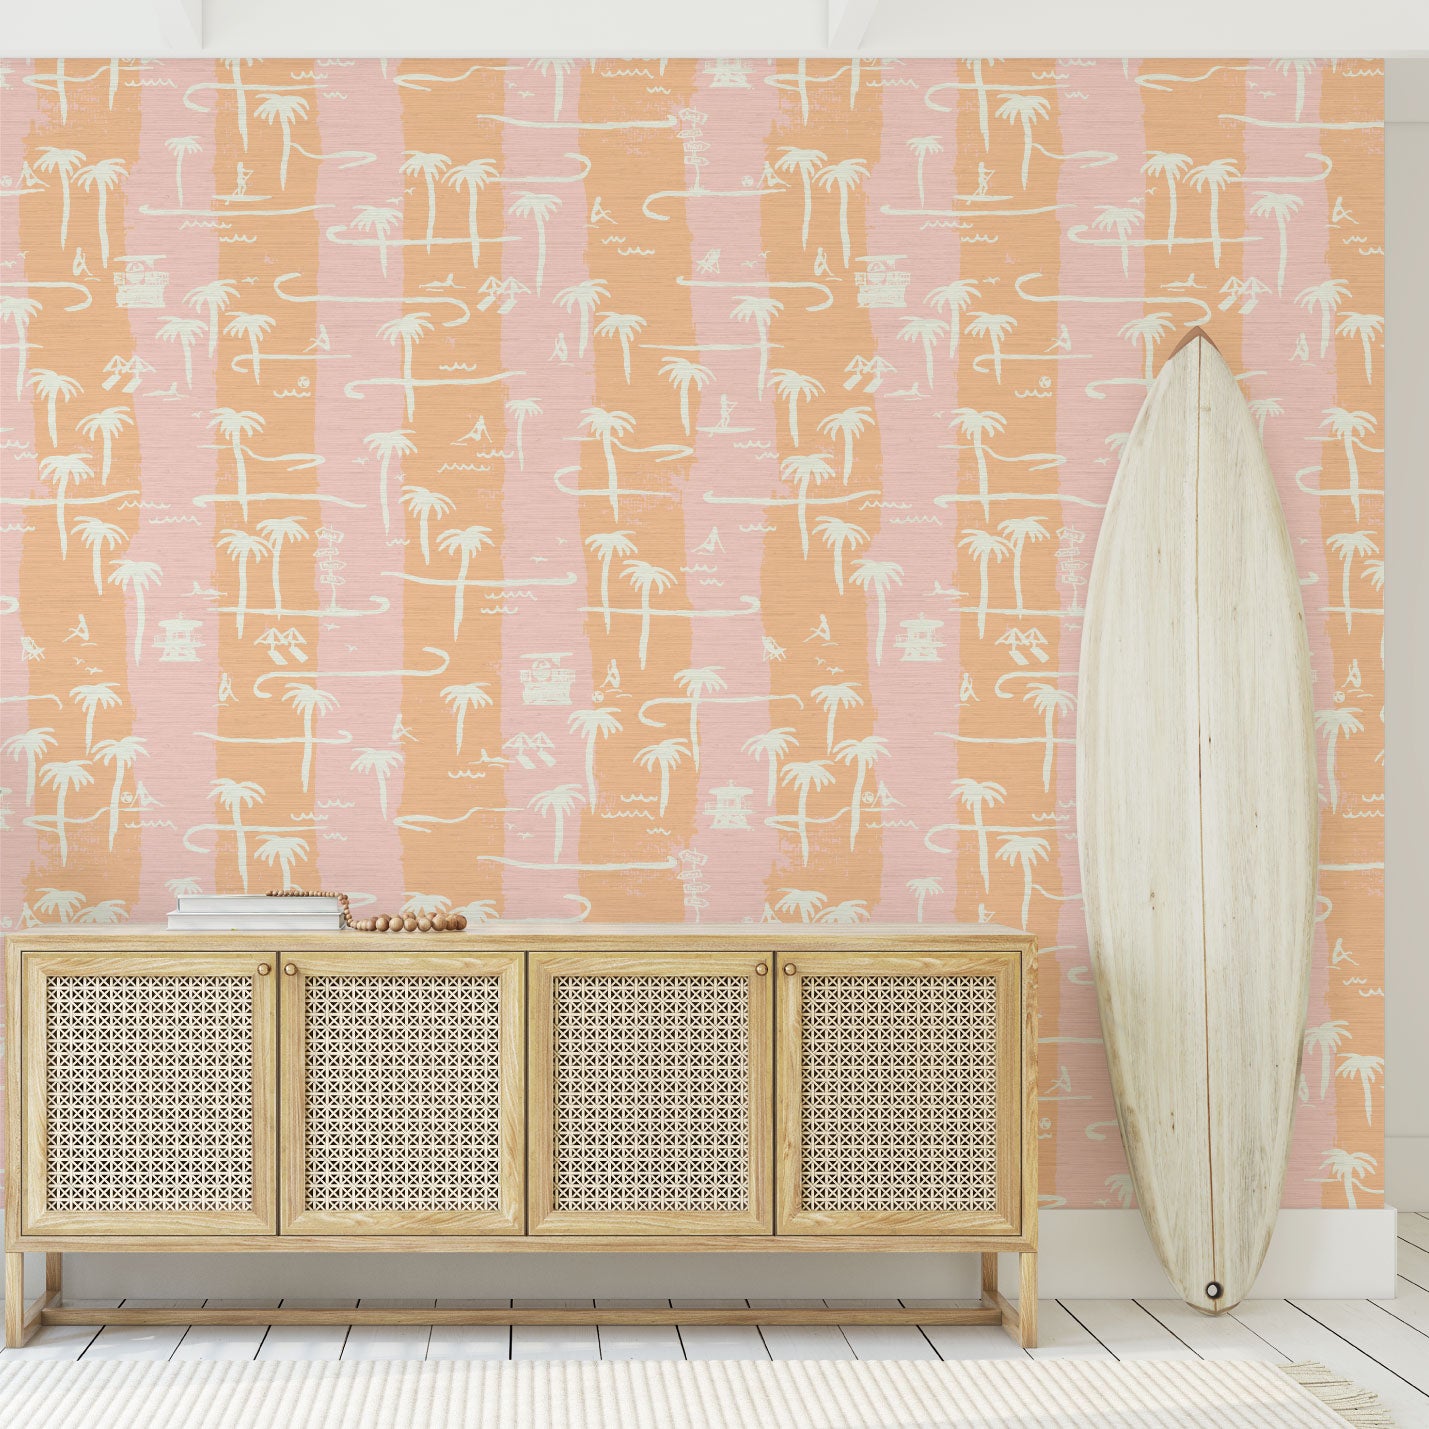 two color vertical stripe beach print featuring palm trees, beachgoers, lifeguard stands and ocean waves Grasscloth Natural Textured Eco-Friendly Non-toxic High-quality Sustainable practices Sustainability Interior Design Wall covering Bold Wallpaper Custom Tailor-made Retro chic Tropical Seaside Coastal Seashore Waterfront Vacation home styling Retreat Relaxed beach vibes Beach cottage Shoreline Oceanfront Nautical pink baby orange sunset tangerine coral living room entrance foyer surf surfboard